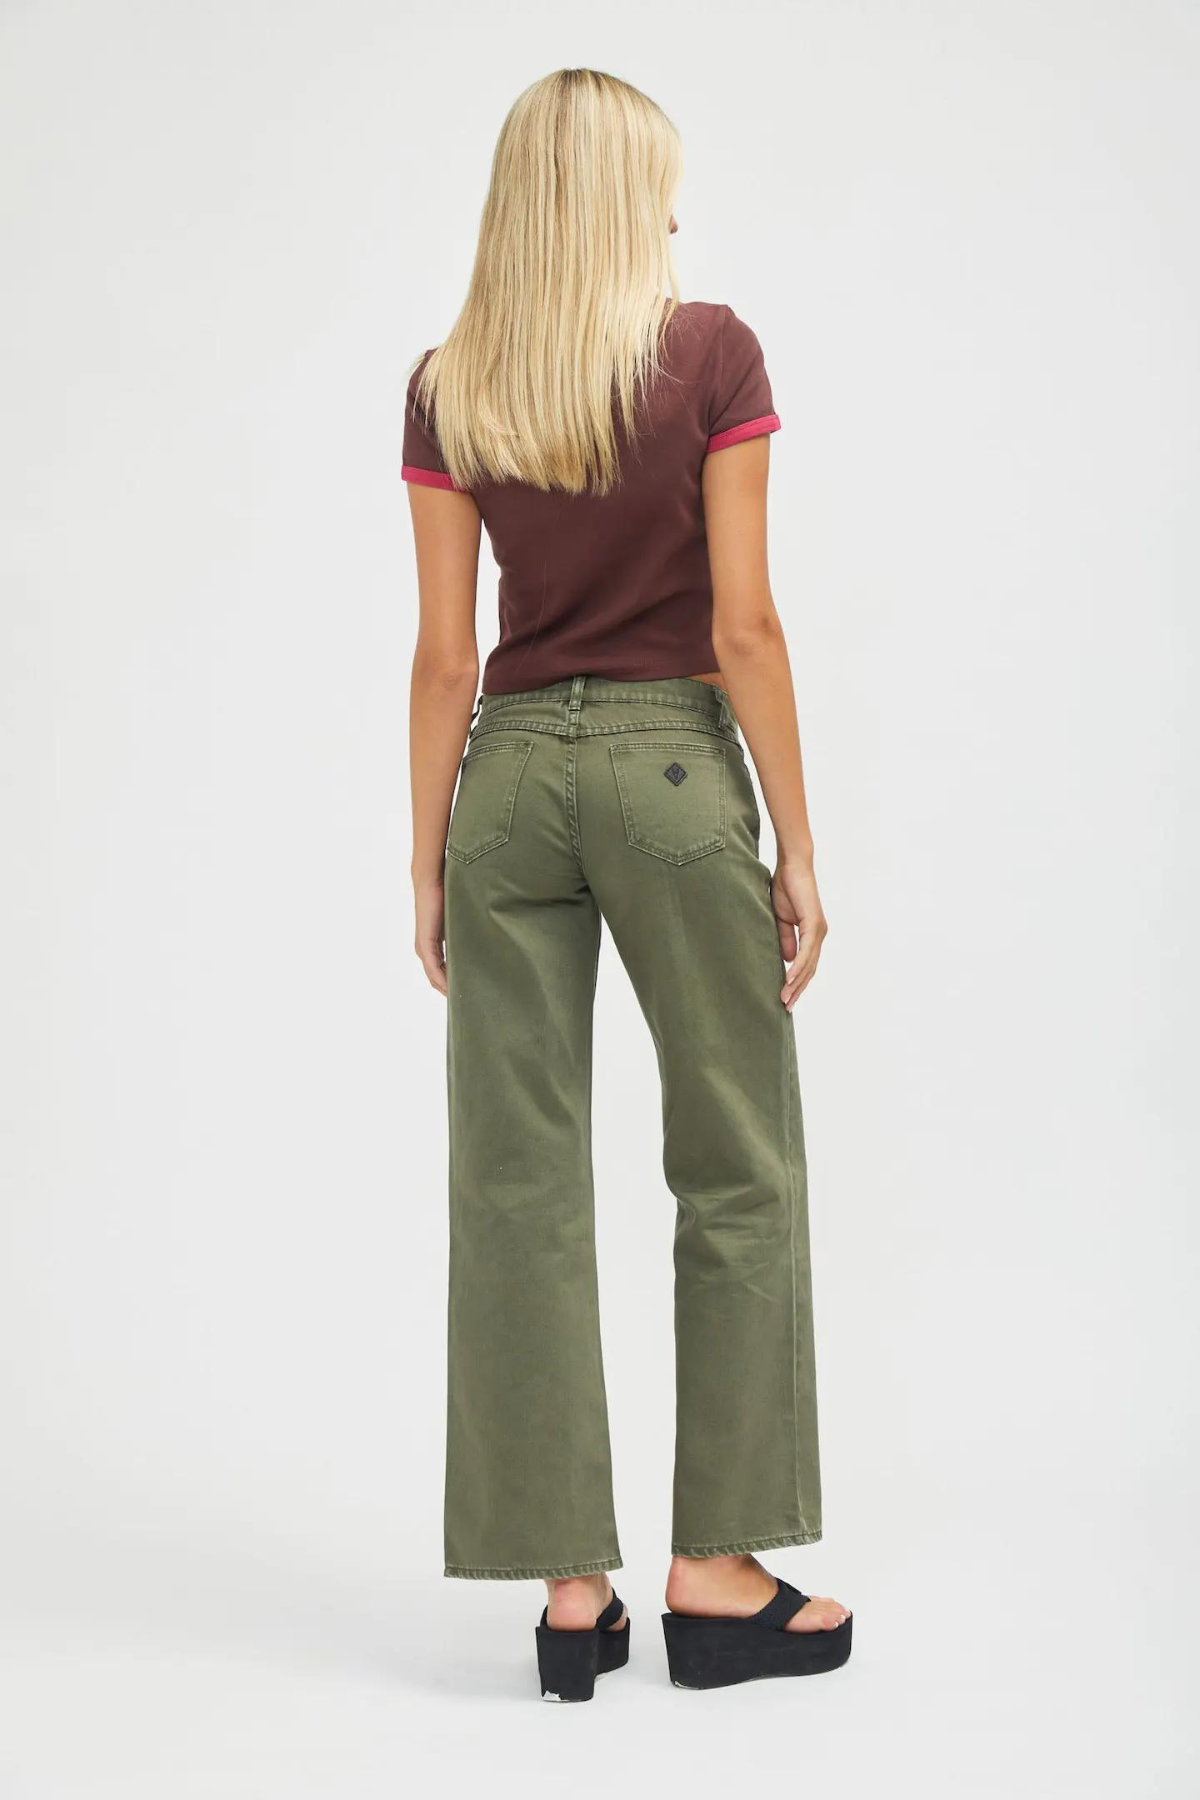 Low and Wide Olive Cargo Pant, Pant Bottom by ABRAND | LIT Boutique